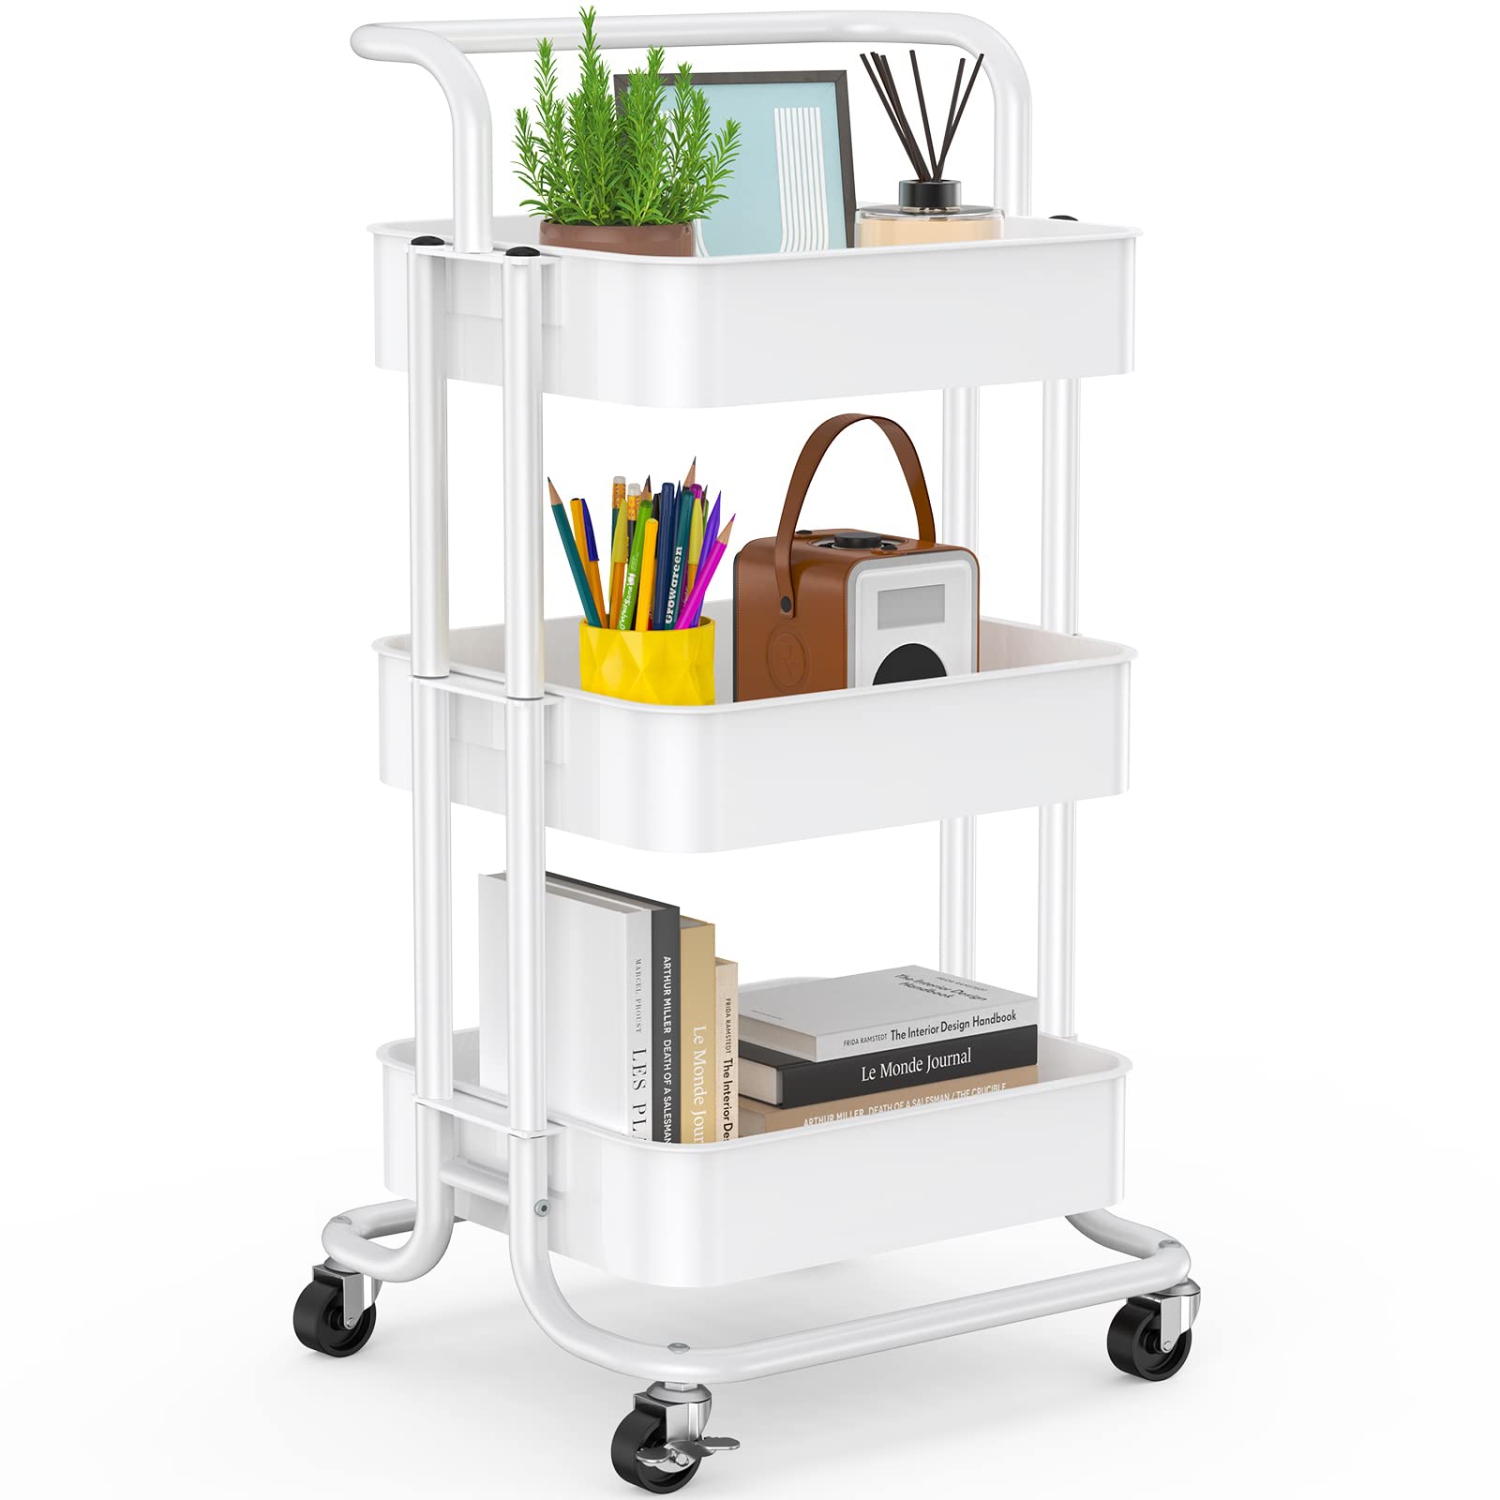 3-Tier Rolling Utility Cart, Multifunctional Metal Organization Storage Cart with 2 Lockable Wheels for Office, Home, Kitchen, Bedroom, Bathroom, Laundry Room (White)